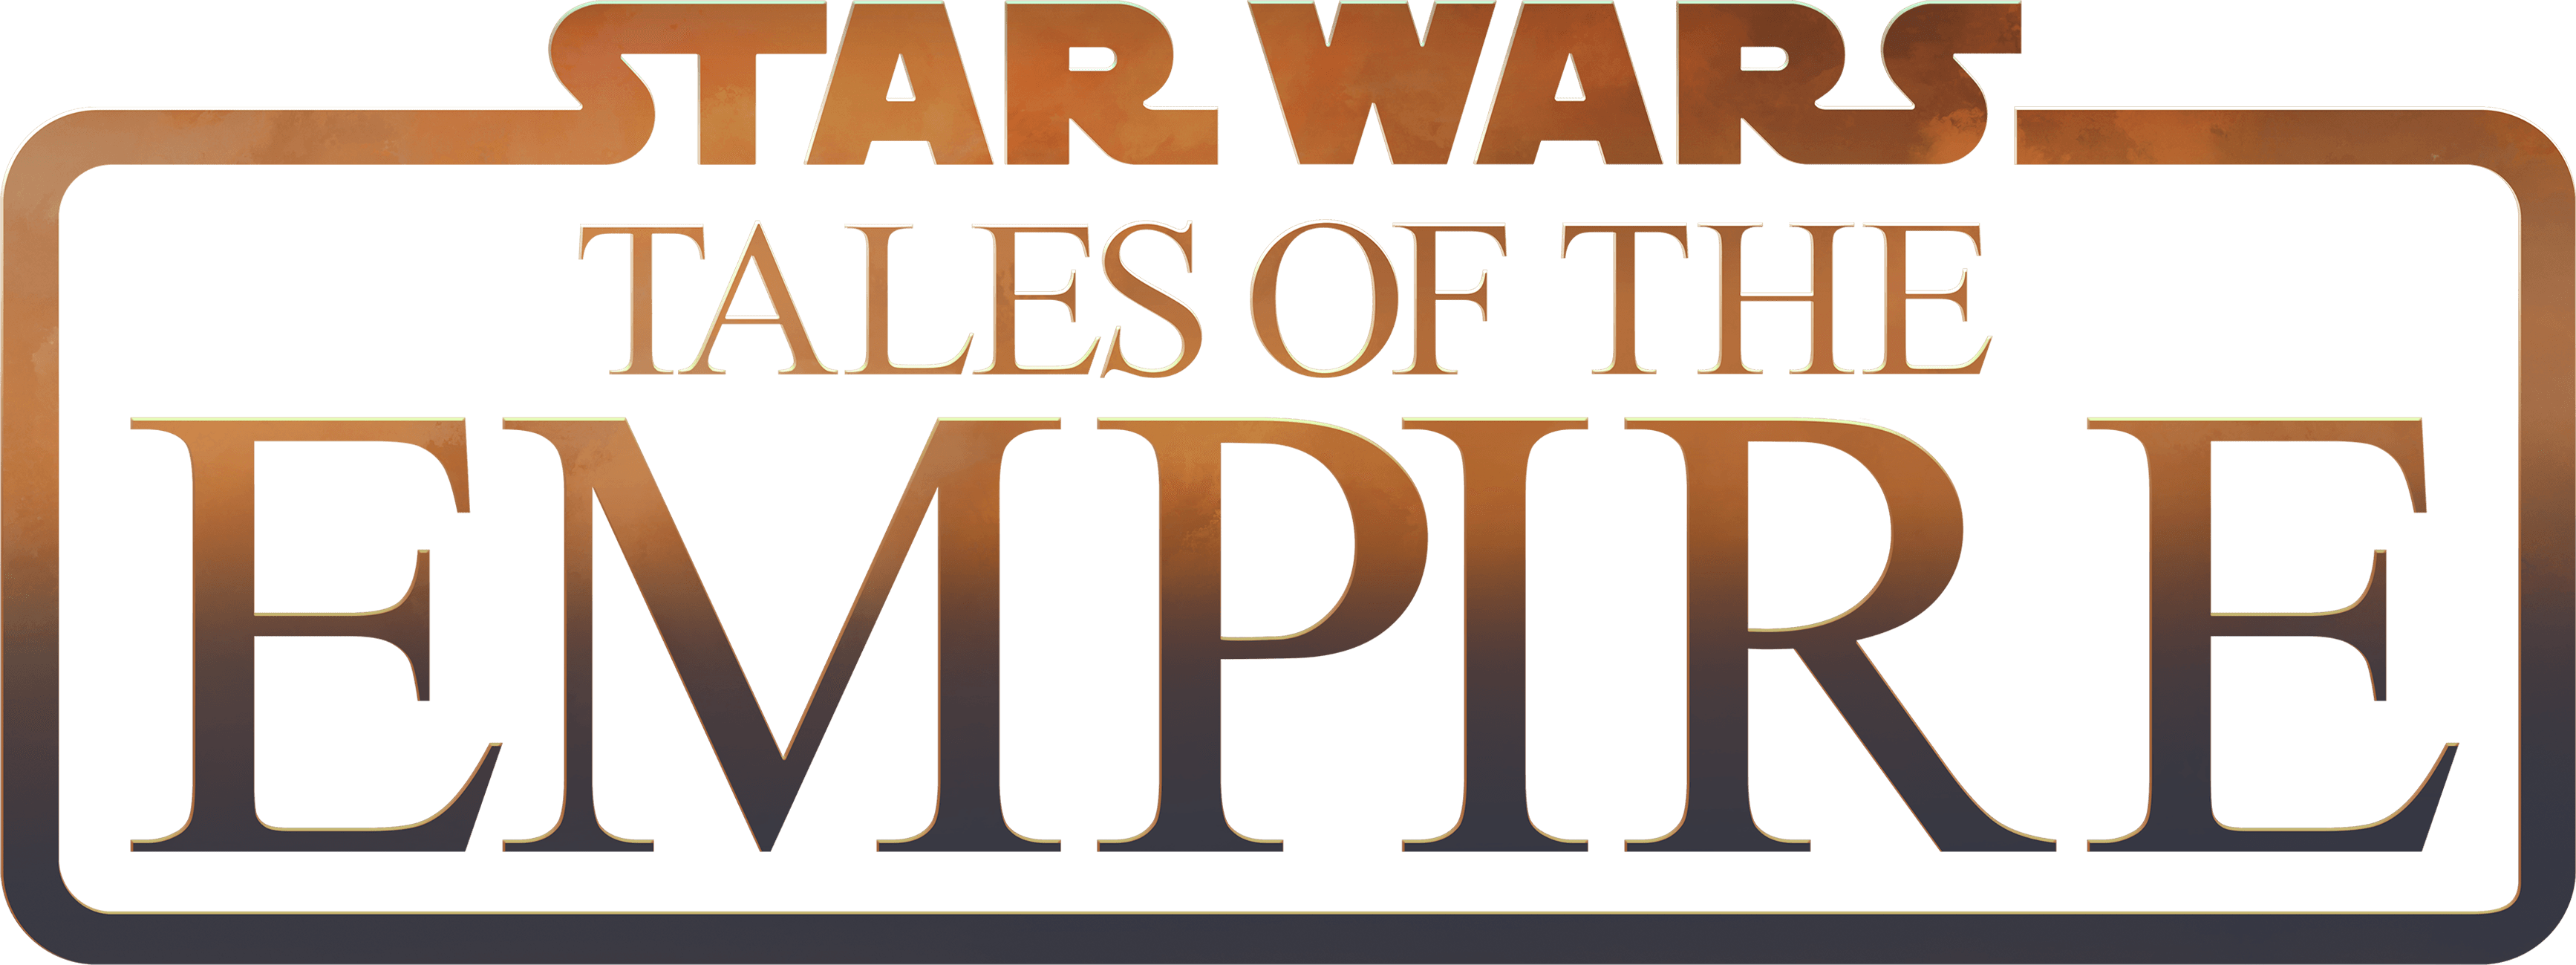 Star Wars: Tales of the Empire logo